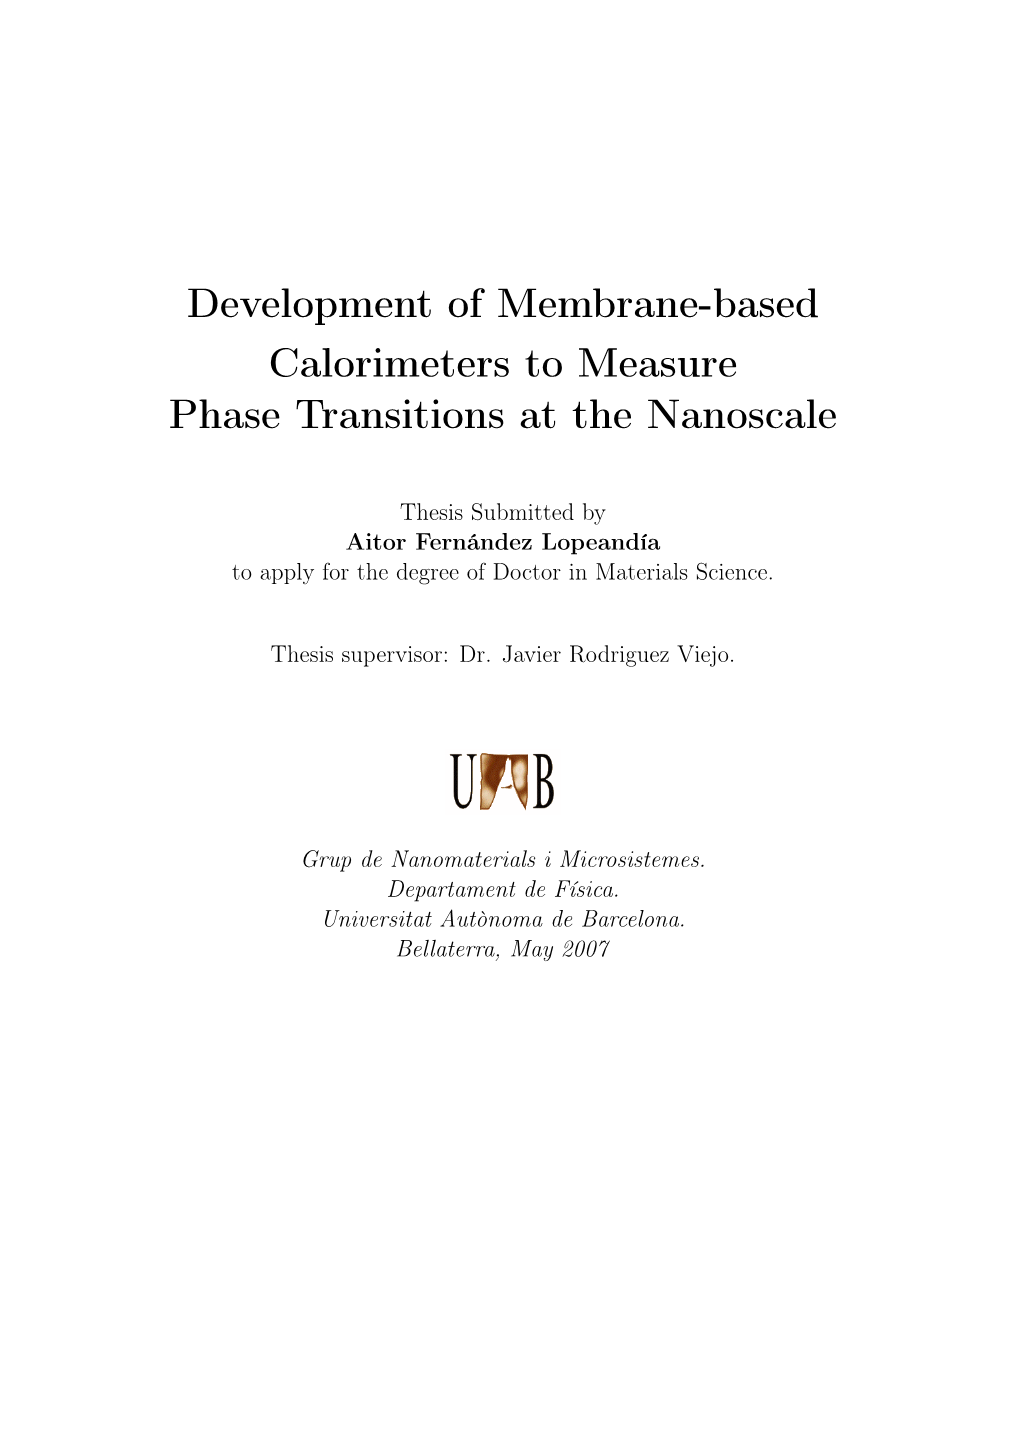 Development of Membrane-Based Calorimeters to Measure Phase Transitions at the Nanoscale